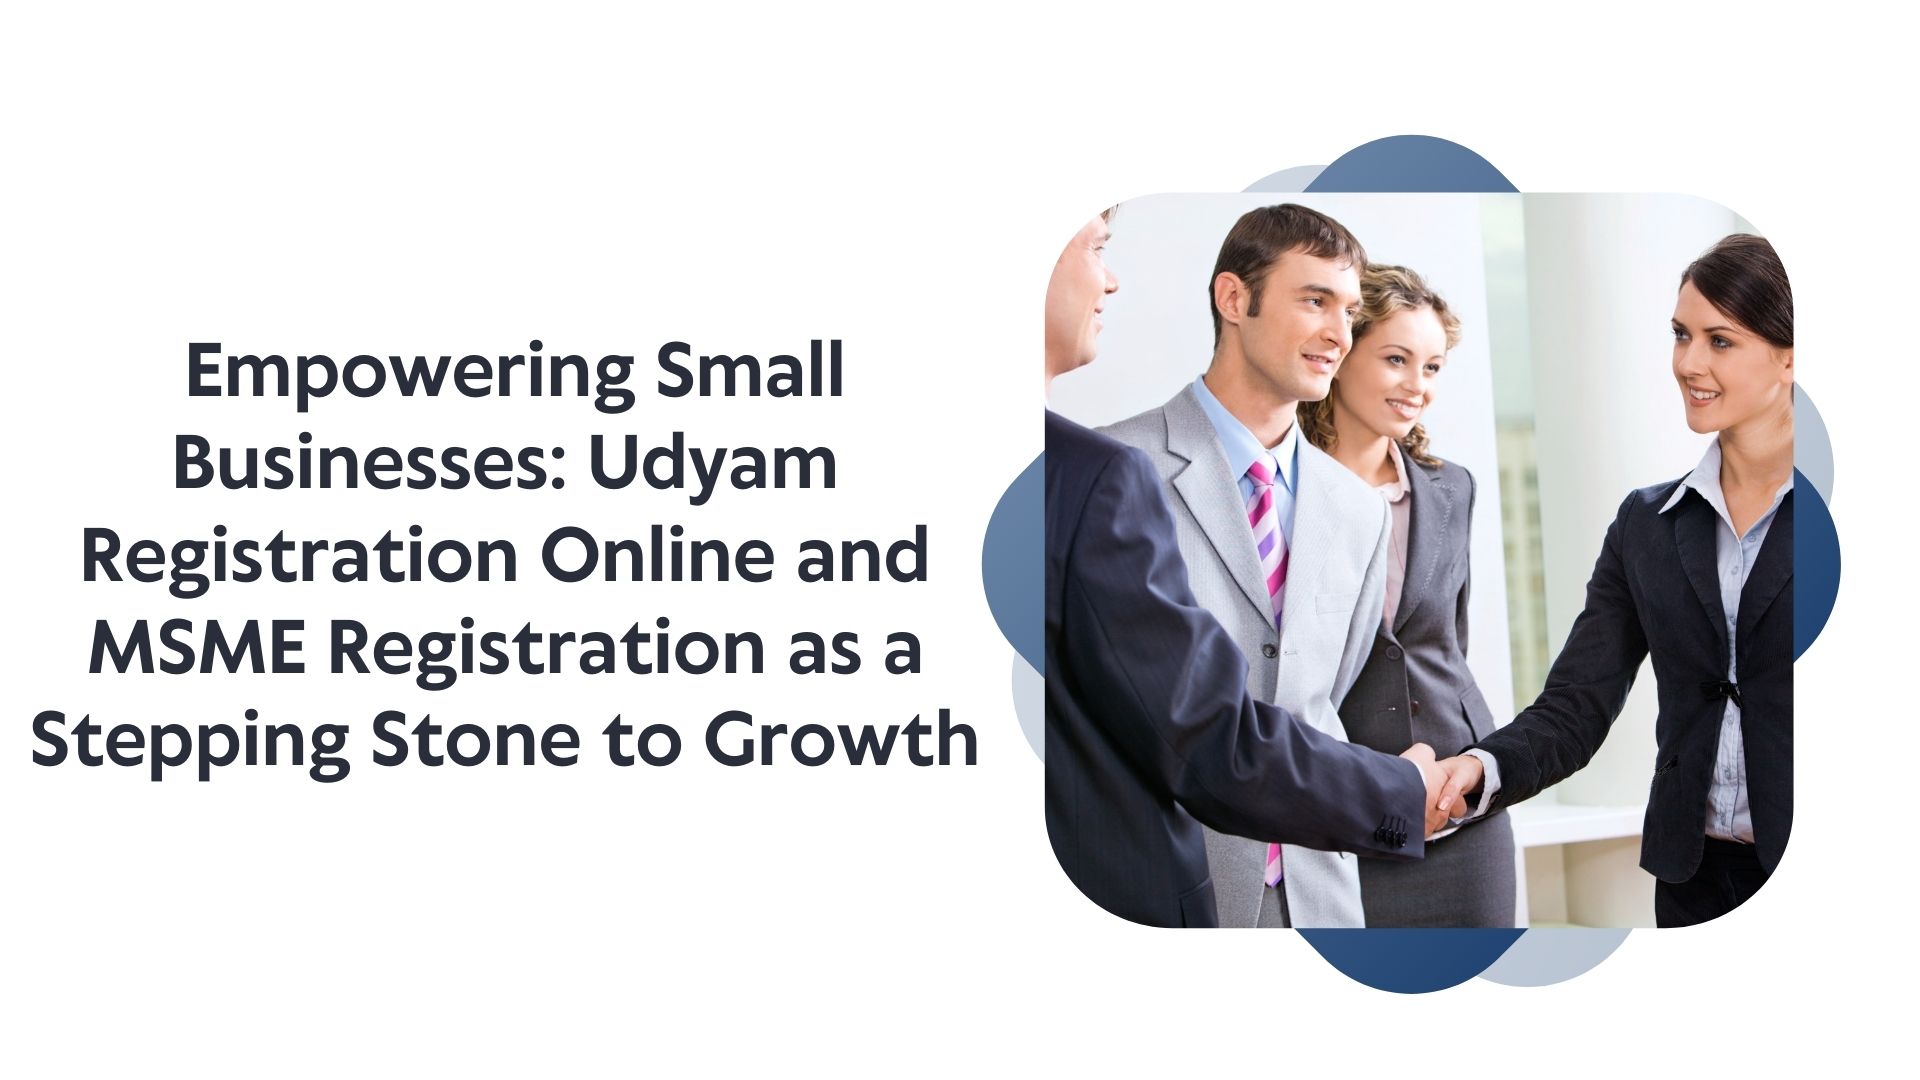 Empowering Small Businesses: Udyam Registration Online and MSME Registration as a Stepping Stone to Growth